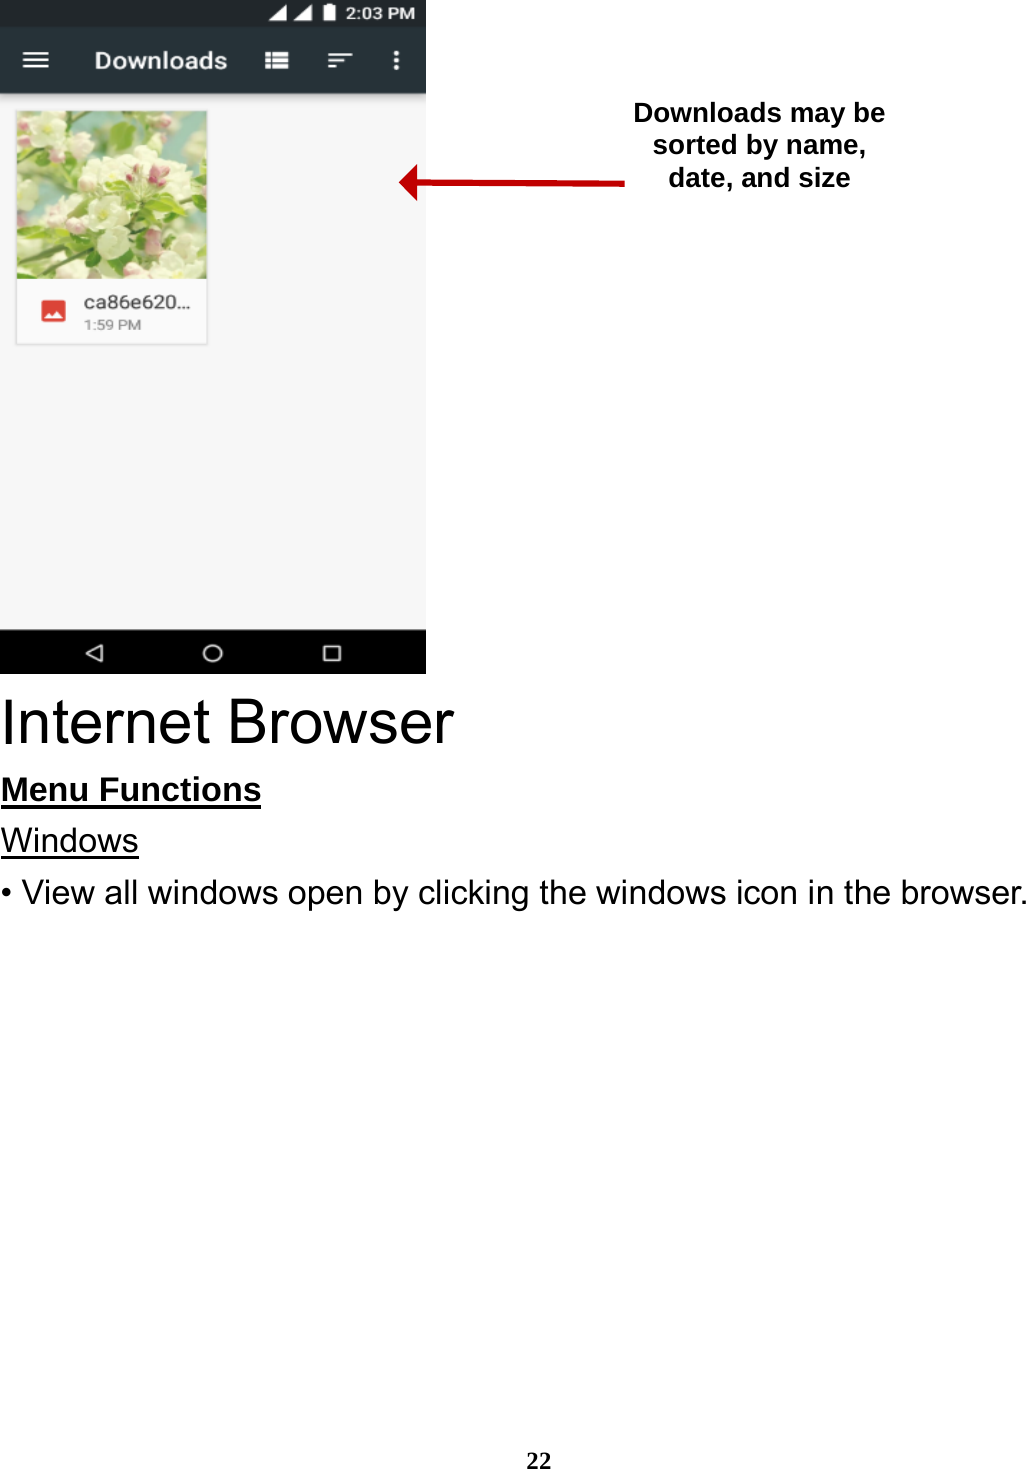  22  Internet Browser Menu Functions                                                     Windows • View all windows open by clicking the windows icon in the browser. Downloads may be sorted by name, date, and size 